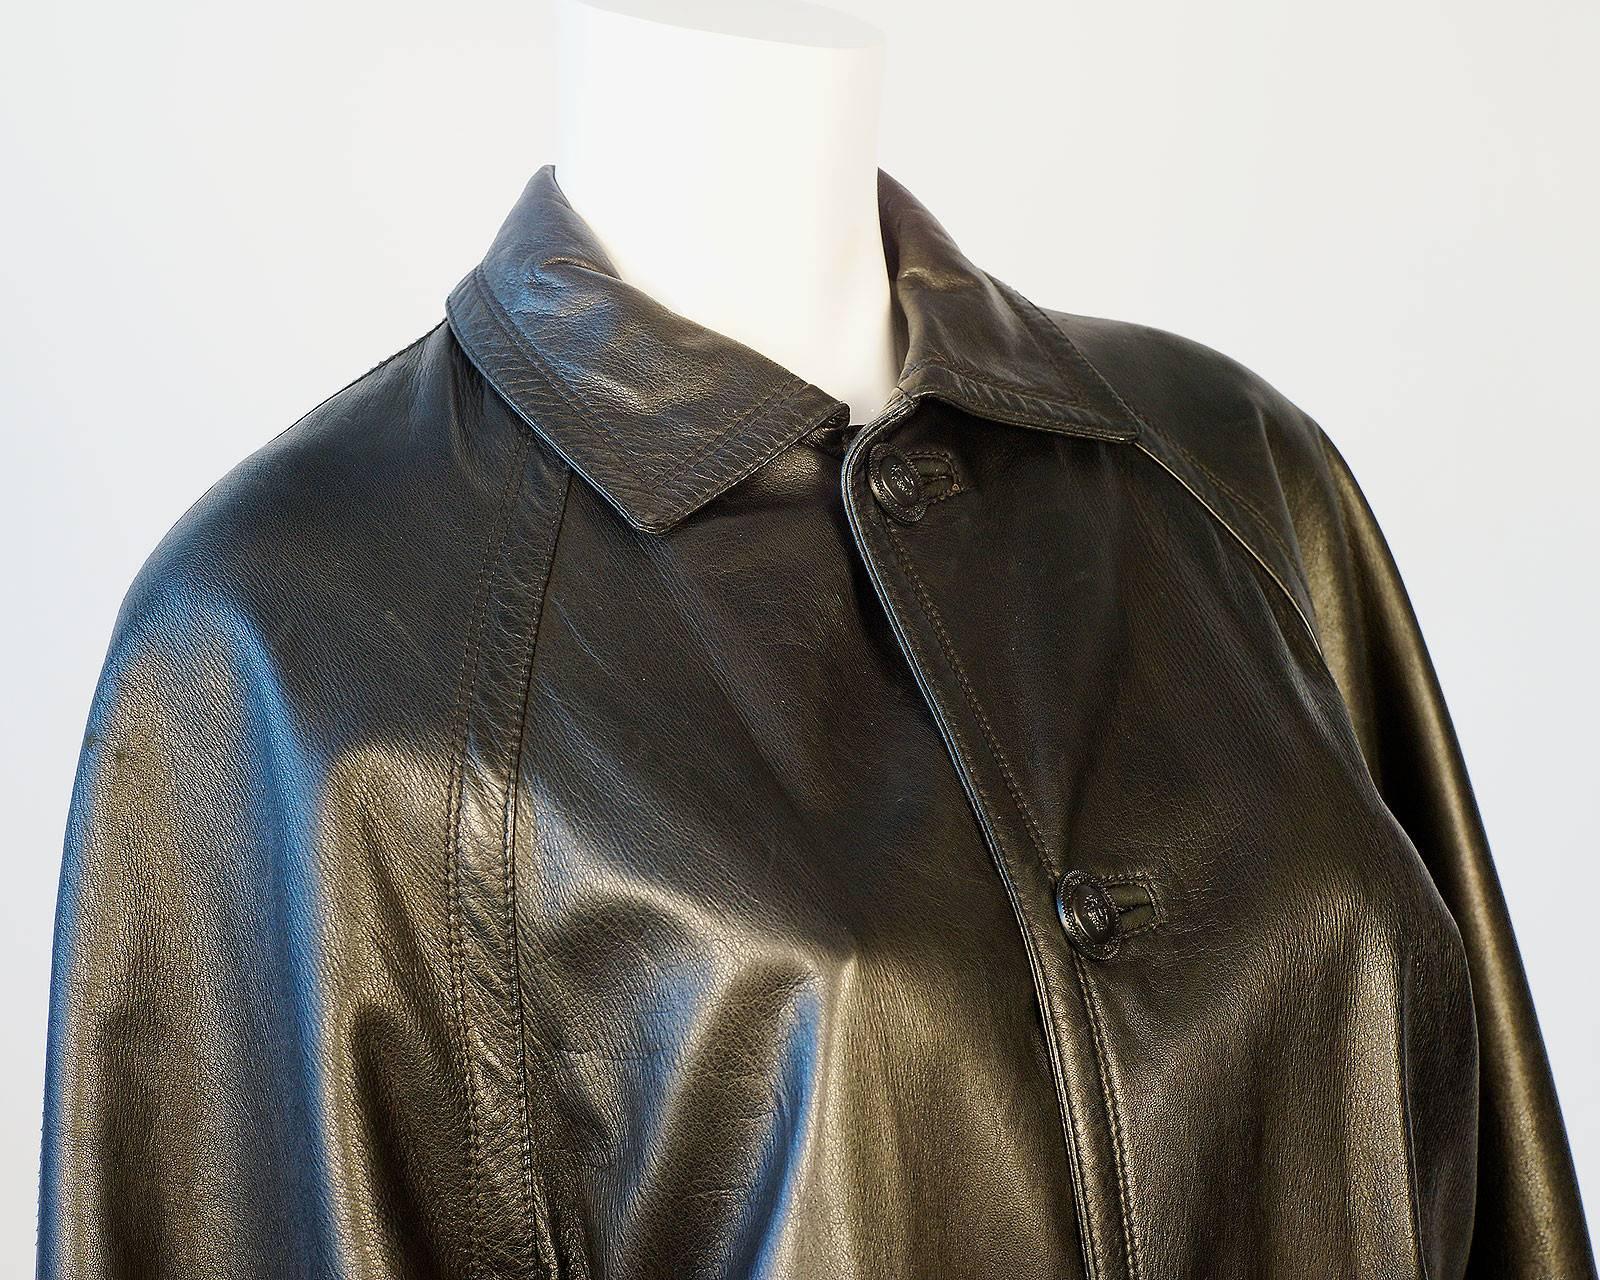 Gianni Versace black leather car coat with cashmere/satin lining and medusa logo buttons.

-Measurements-
Jacket Waist: 23